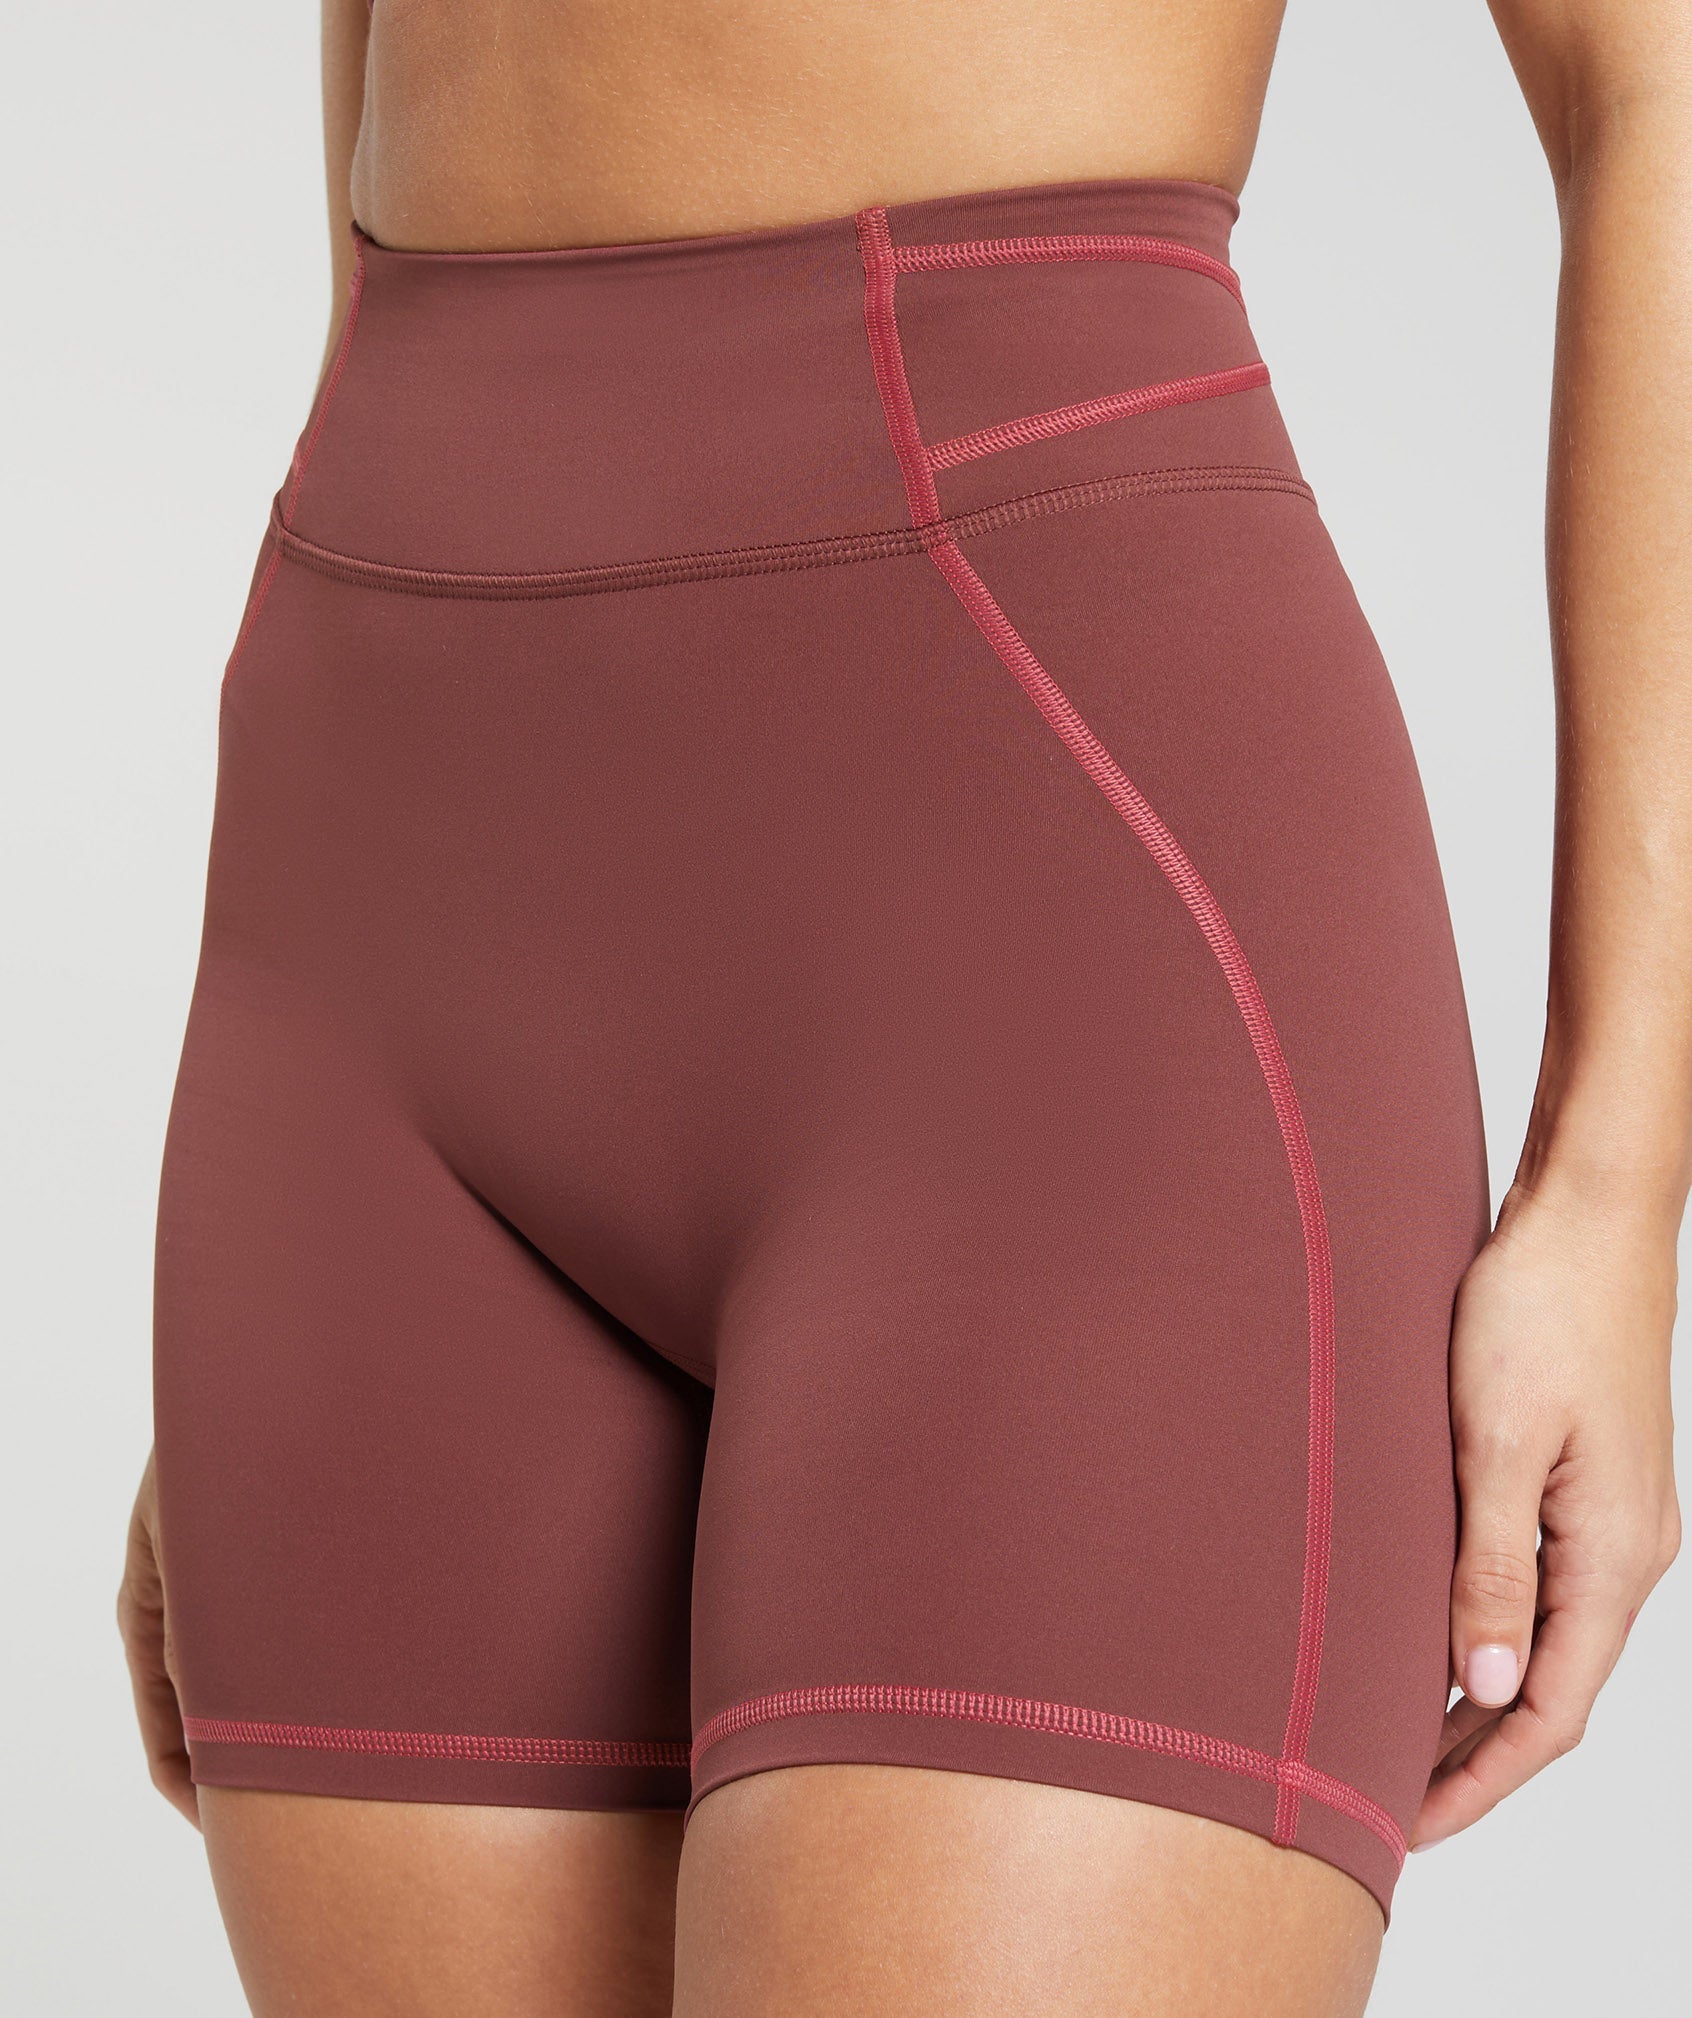 Stitch Feature Shorts in Burgundy Brown - view 6